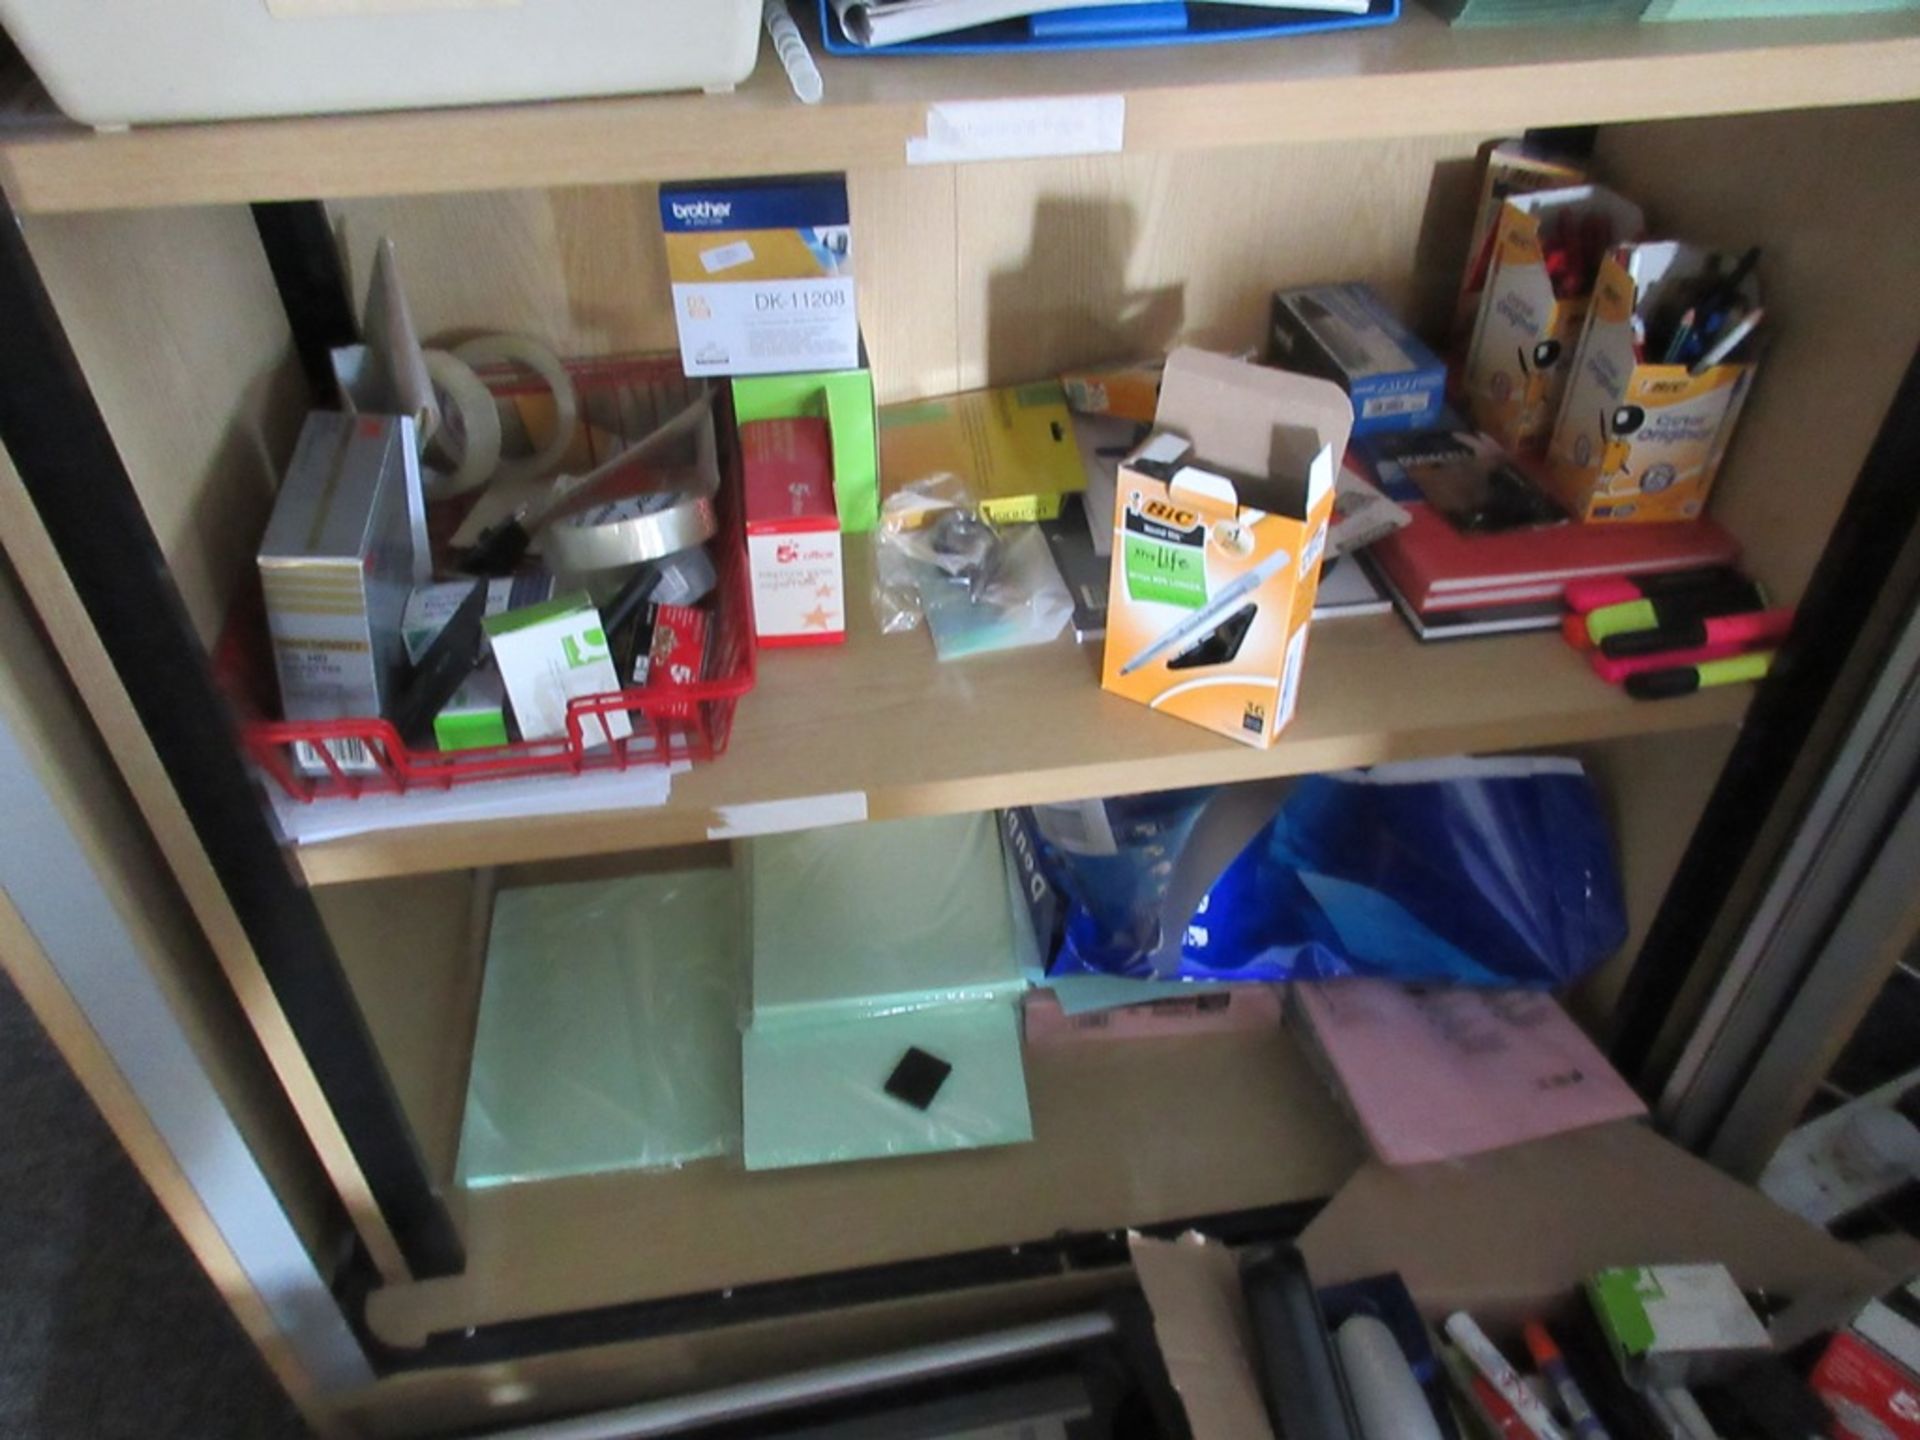 Wood effect tambour storage cupboard with assorted office sundries including pens, highlighters, - Image 2 of 8